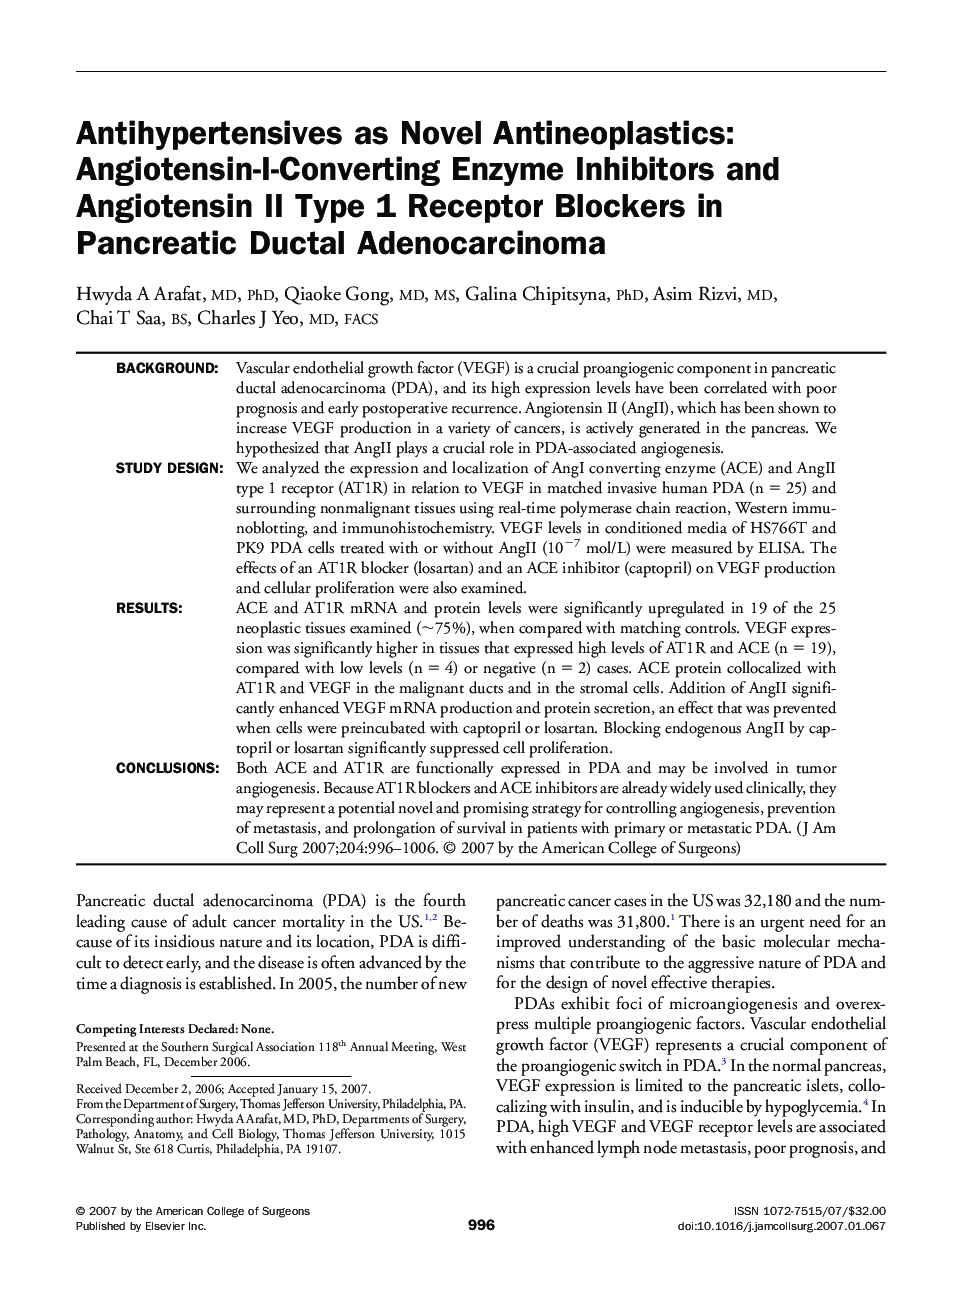 Antihypertensives as Novel Antineoplastics: Angiotensin-I-Converting Enzyme Inhibitors and Angiotensin II Type 1 Receptor Blockers in Pancreatic Ductal Adenocarcinoma 